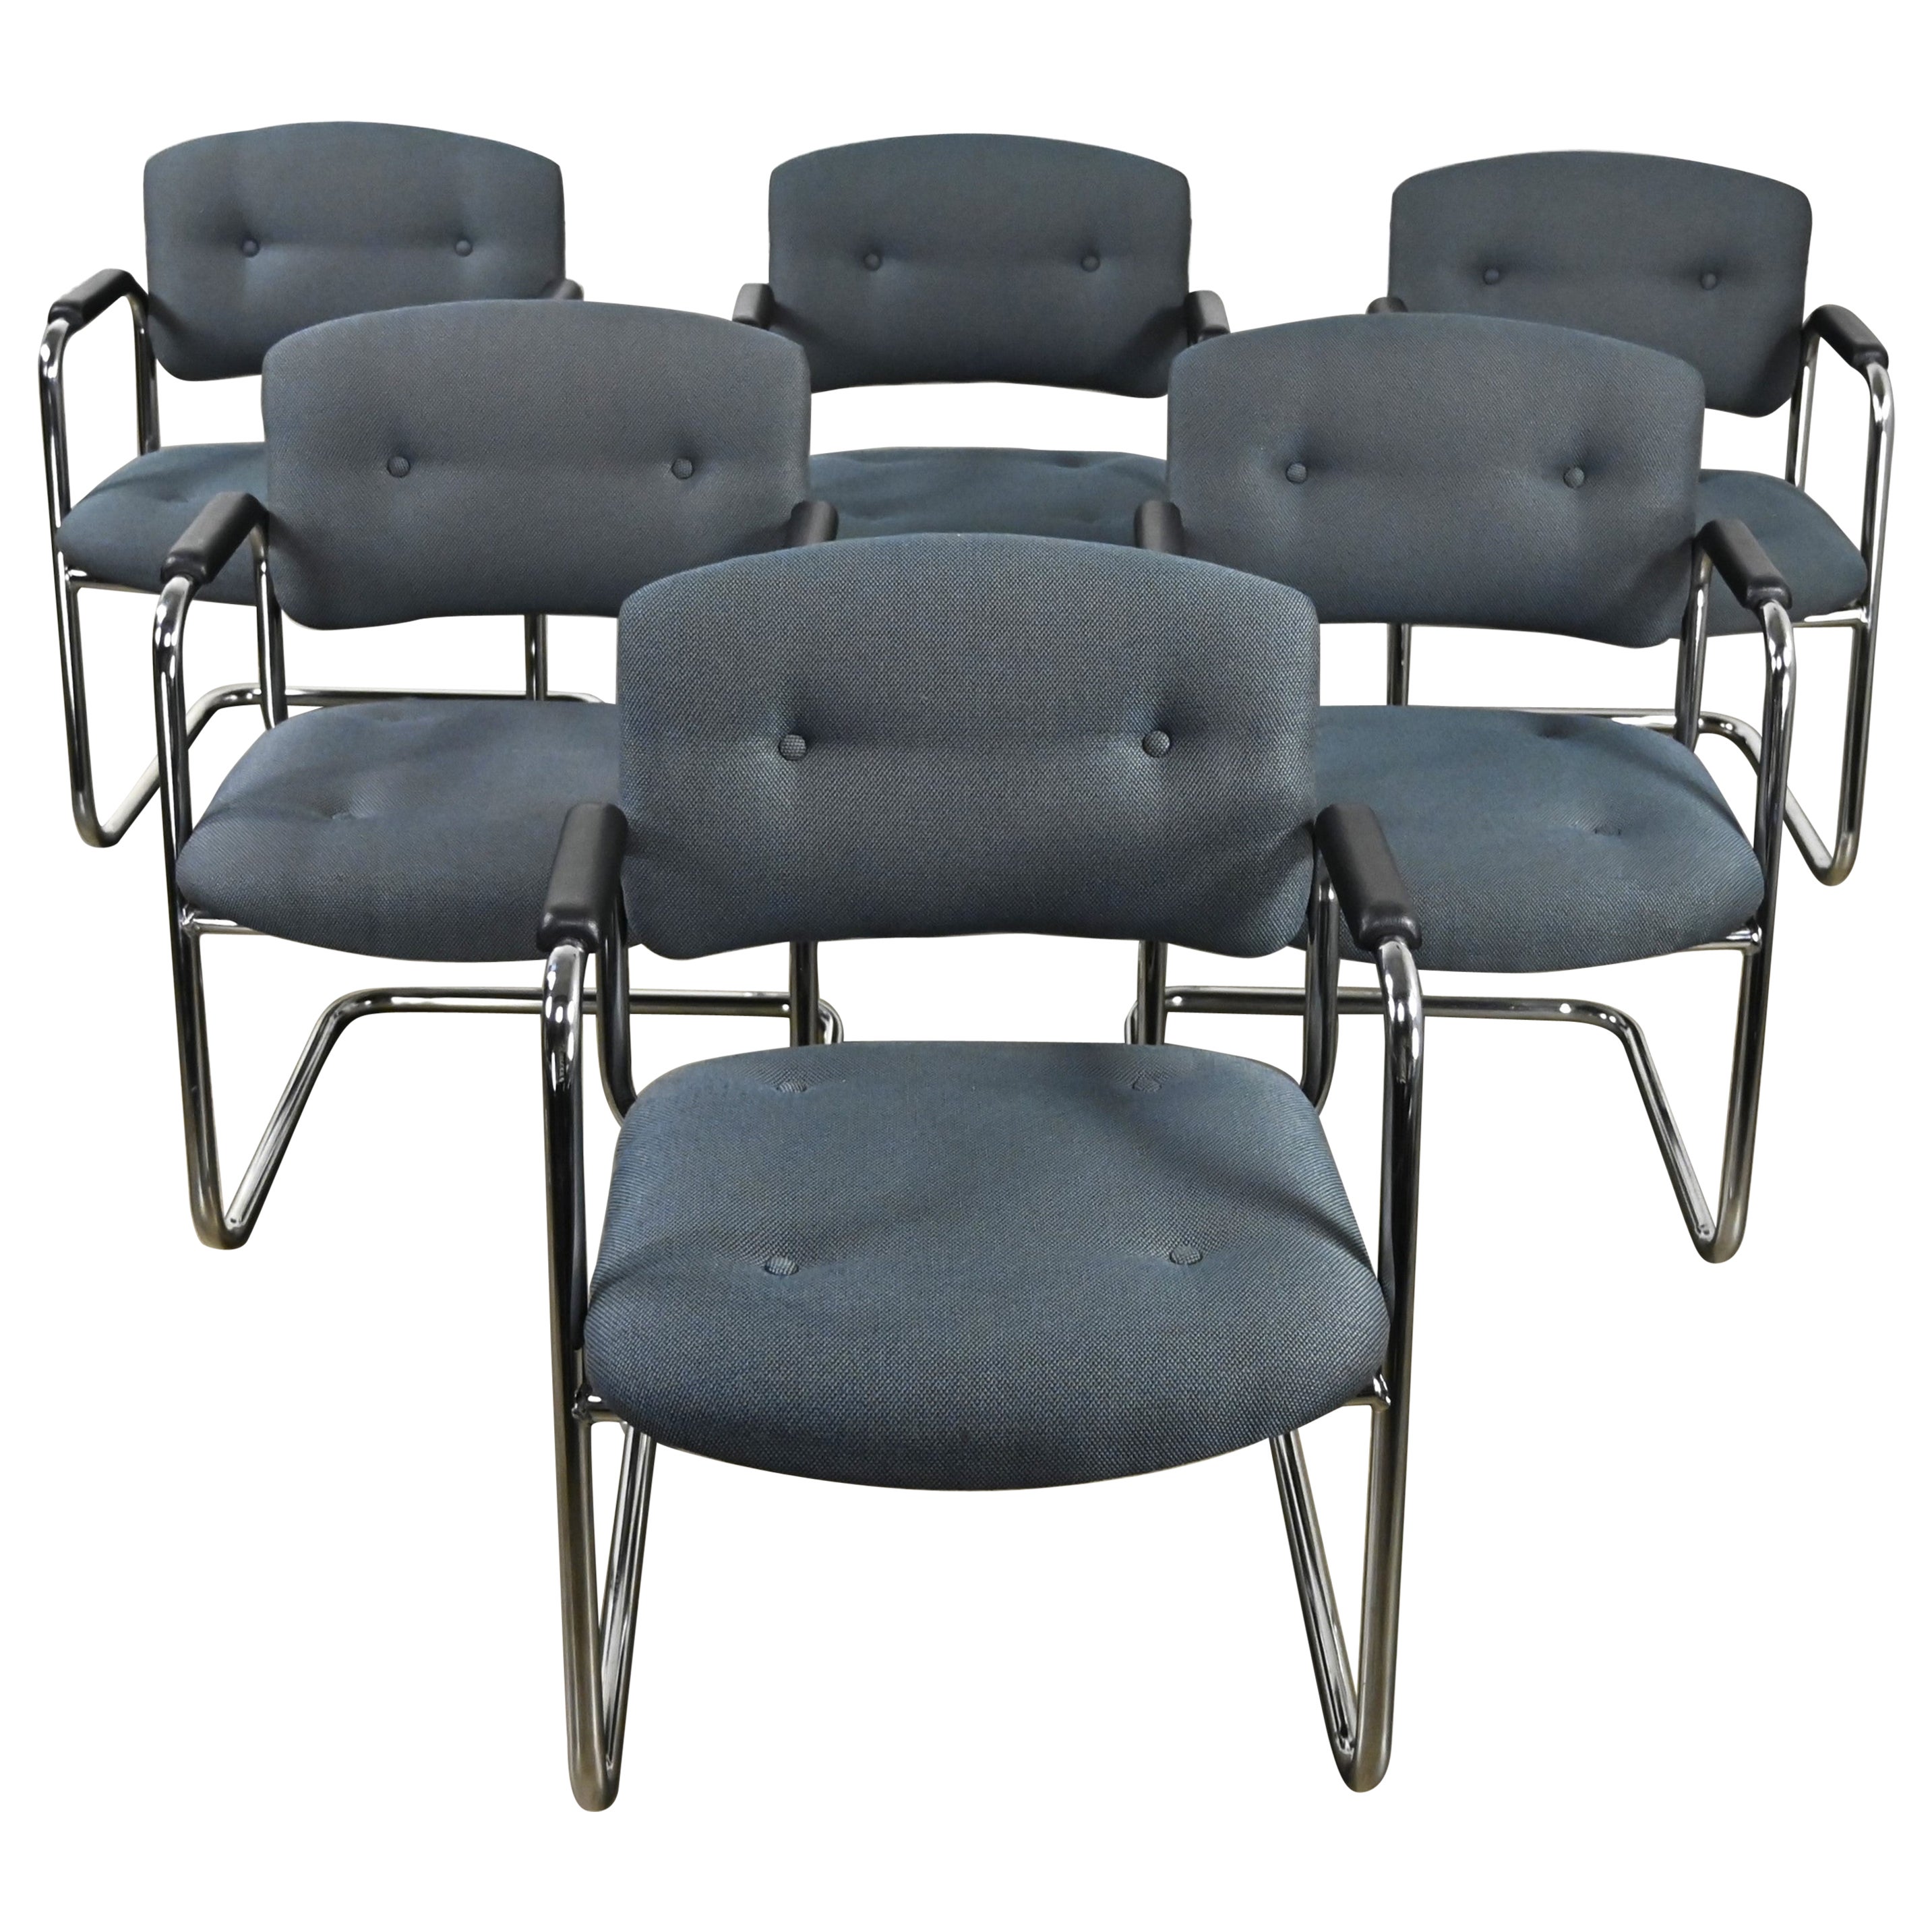 Late 20th Century Gray & Chrome Cantilever Chairs Style Steelcase Set of 6 For Sale